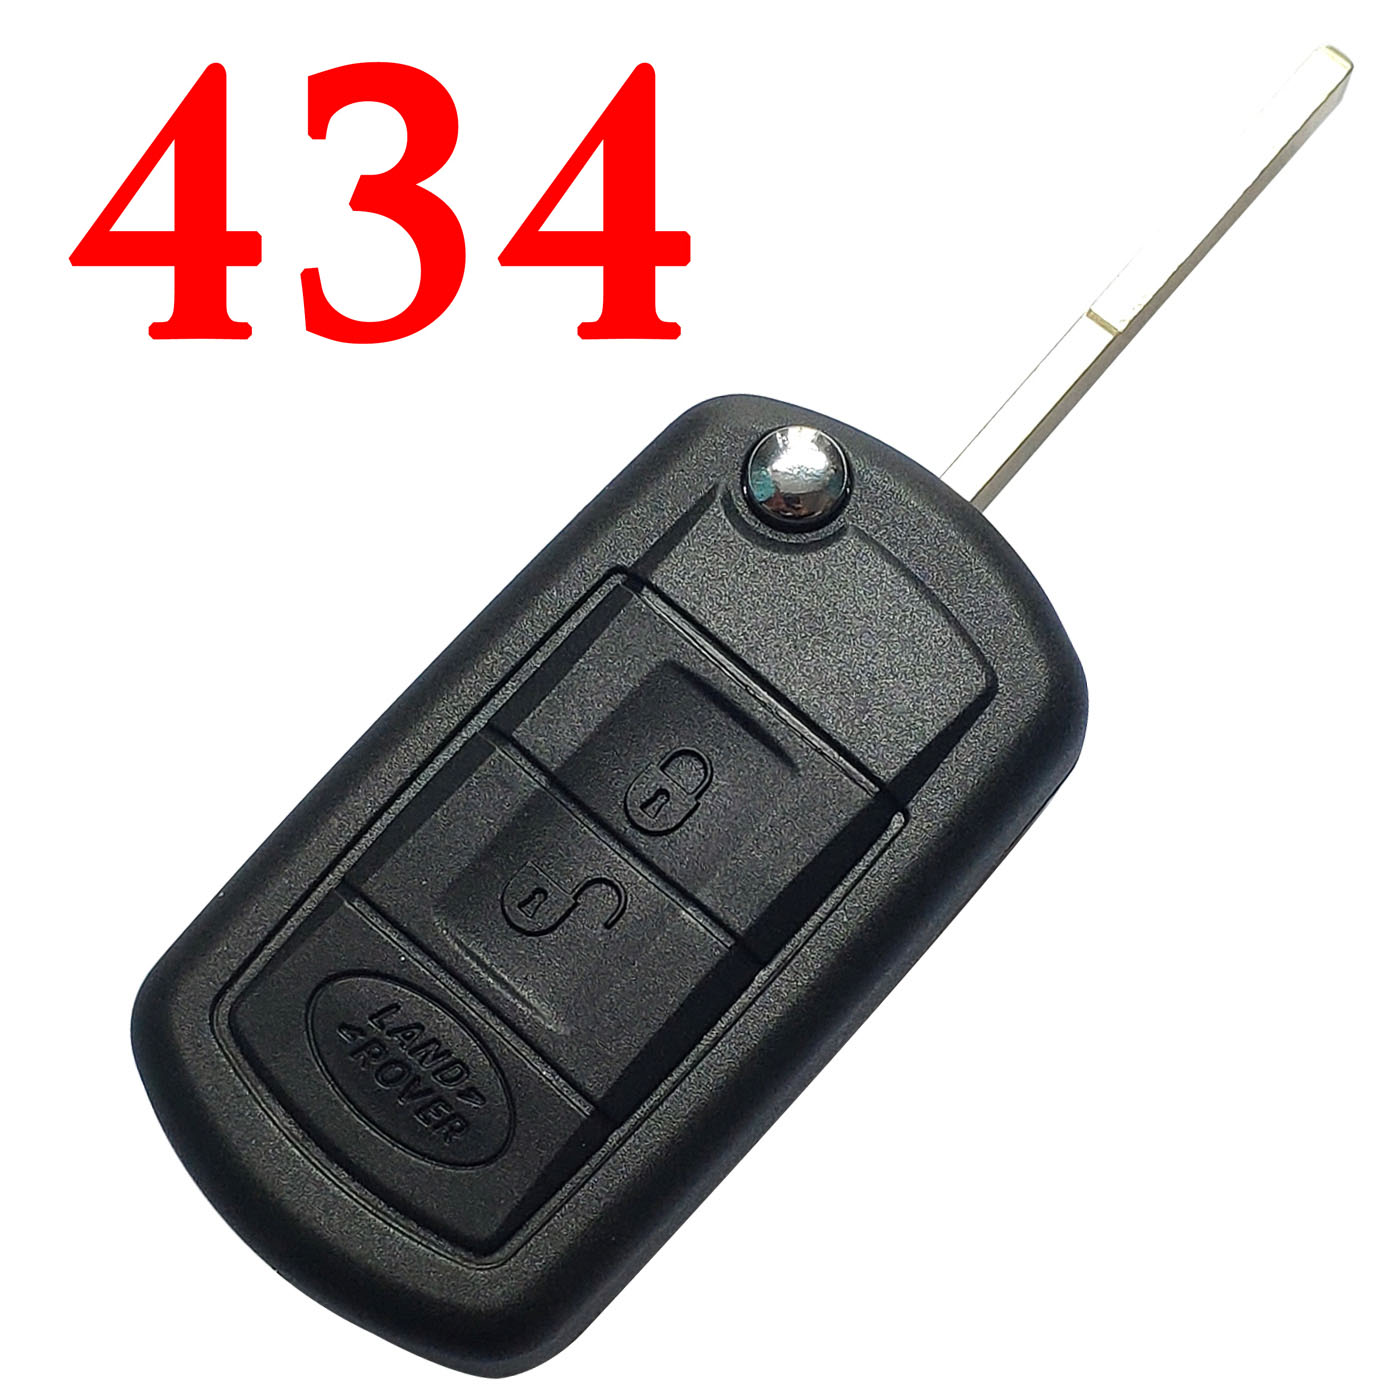  3 Buttons 434 Mhz Flip Remote Key for Land Rover Sport Discovery Vogue